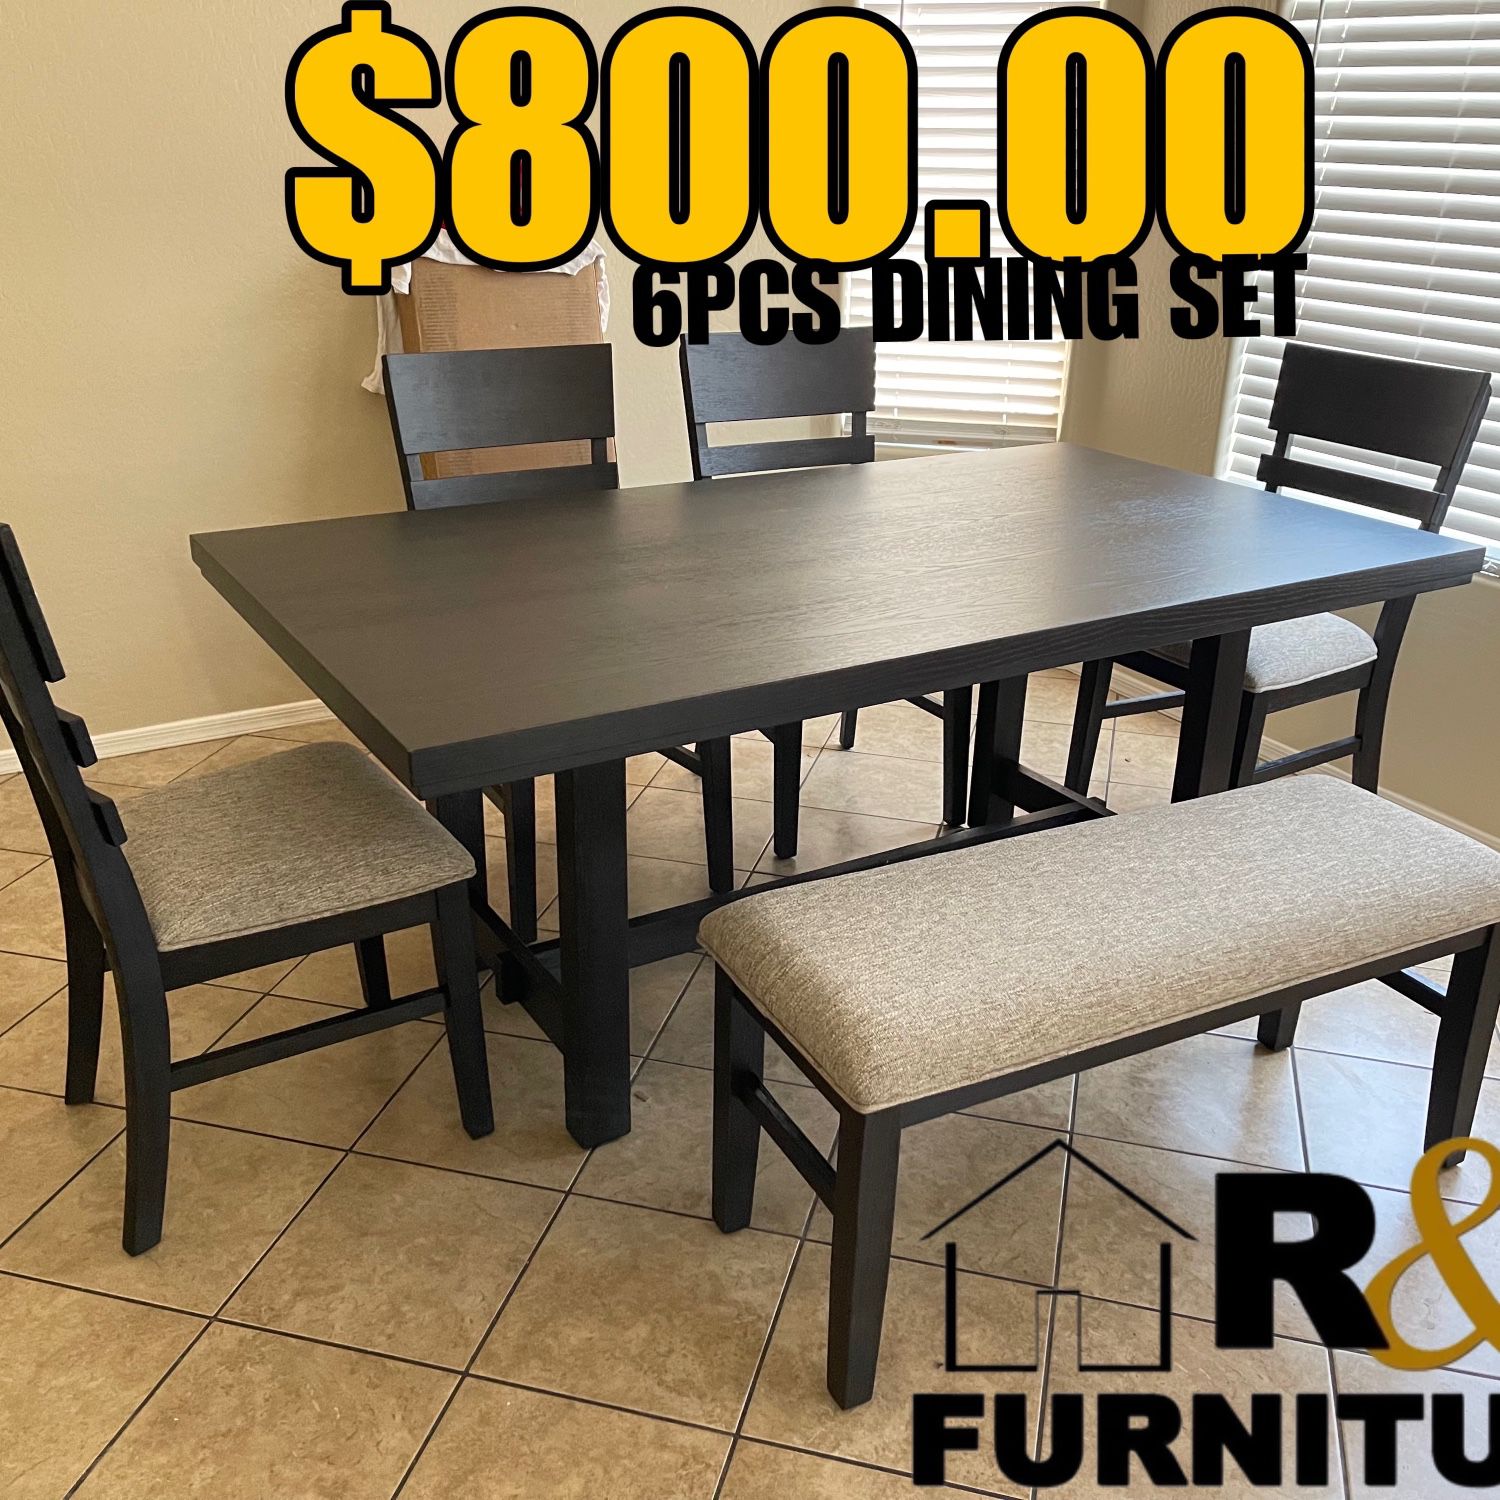 DINING TABLE SET 